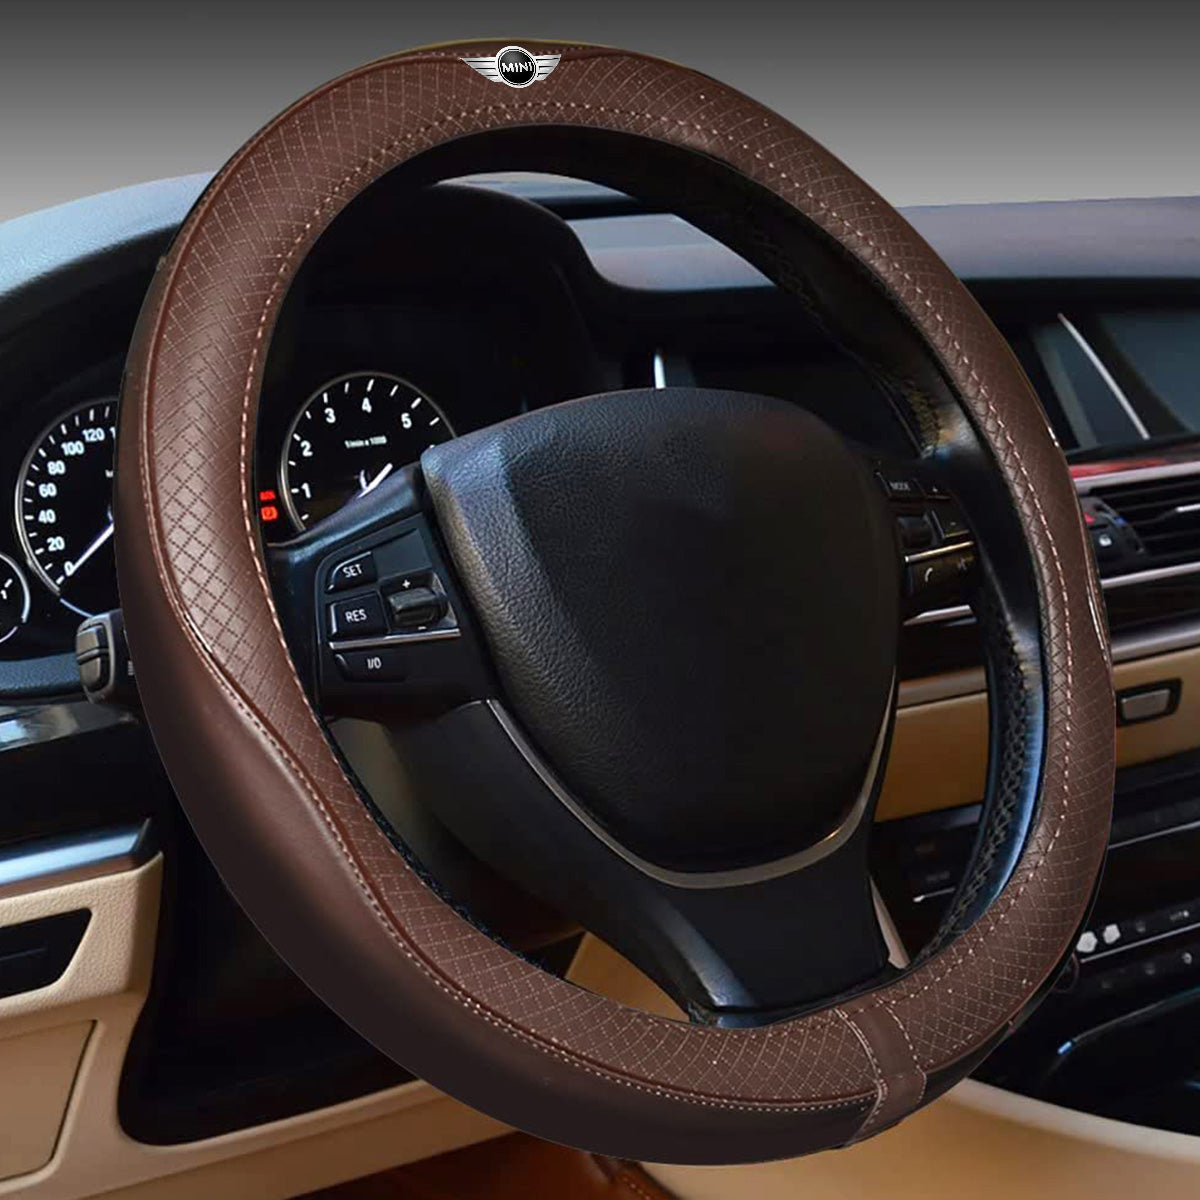 Car Steering Wheel Cover, Custom For Your Cars, Anti-Slip, Safety, Soft, Breathable, Heavy Duty, Thick, Full Surround, Sports Style, Car Accessories MC18990